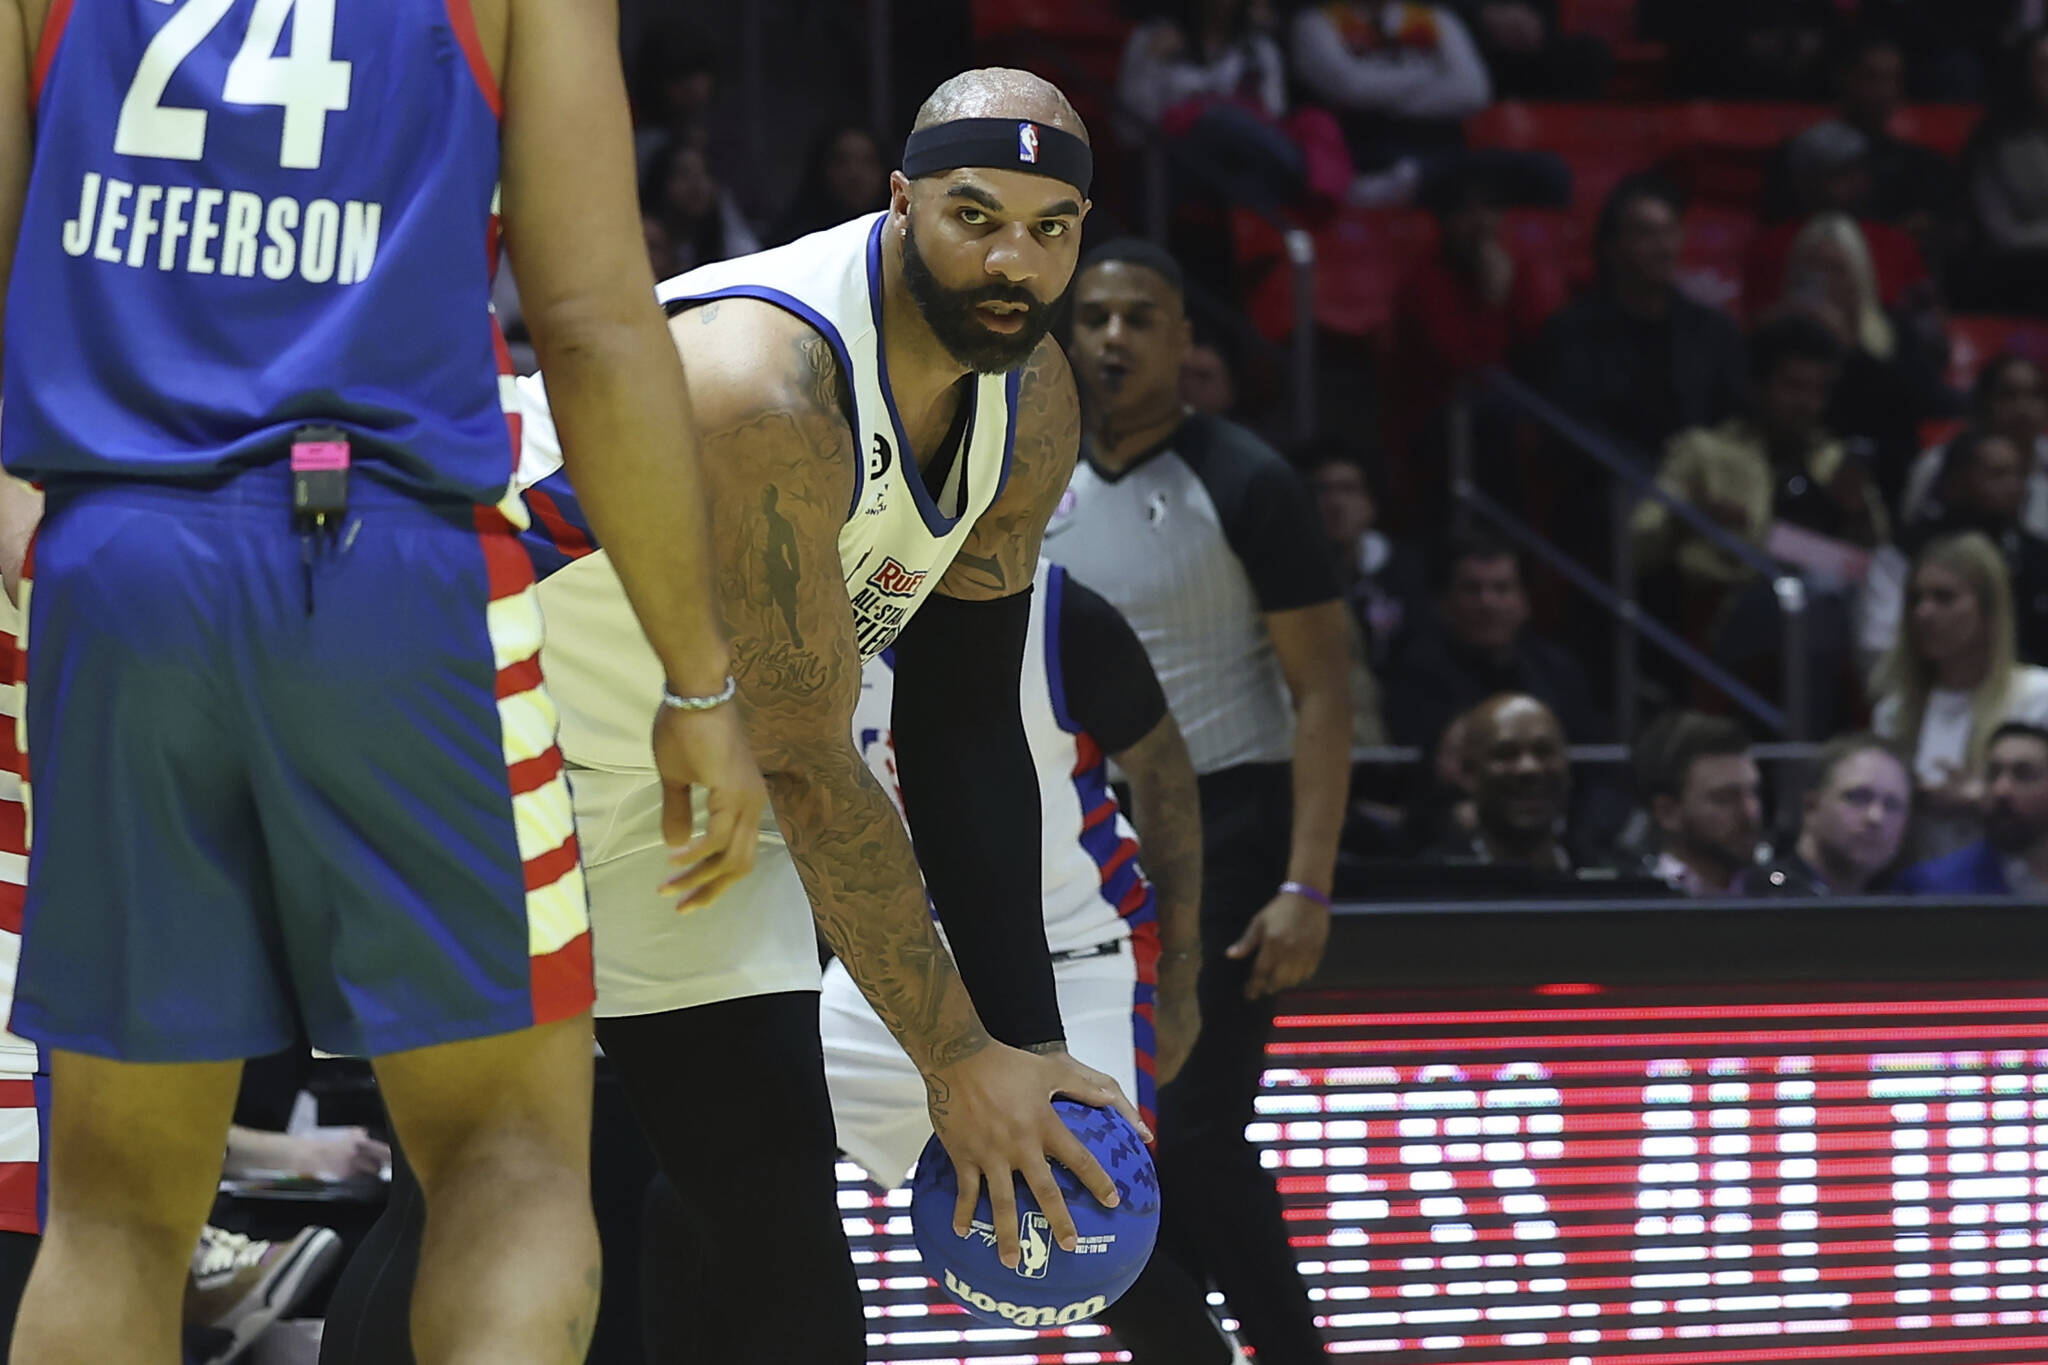 NBA basketball legend Carlos Boozer looks to move the ball in the second half of an NBA All-Star Celebrity Game, Friday, Feb. 17, 2023, in Salt Lake City. (AP Photo/Rob Gray)